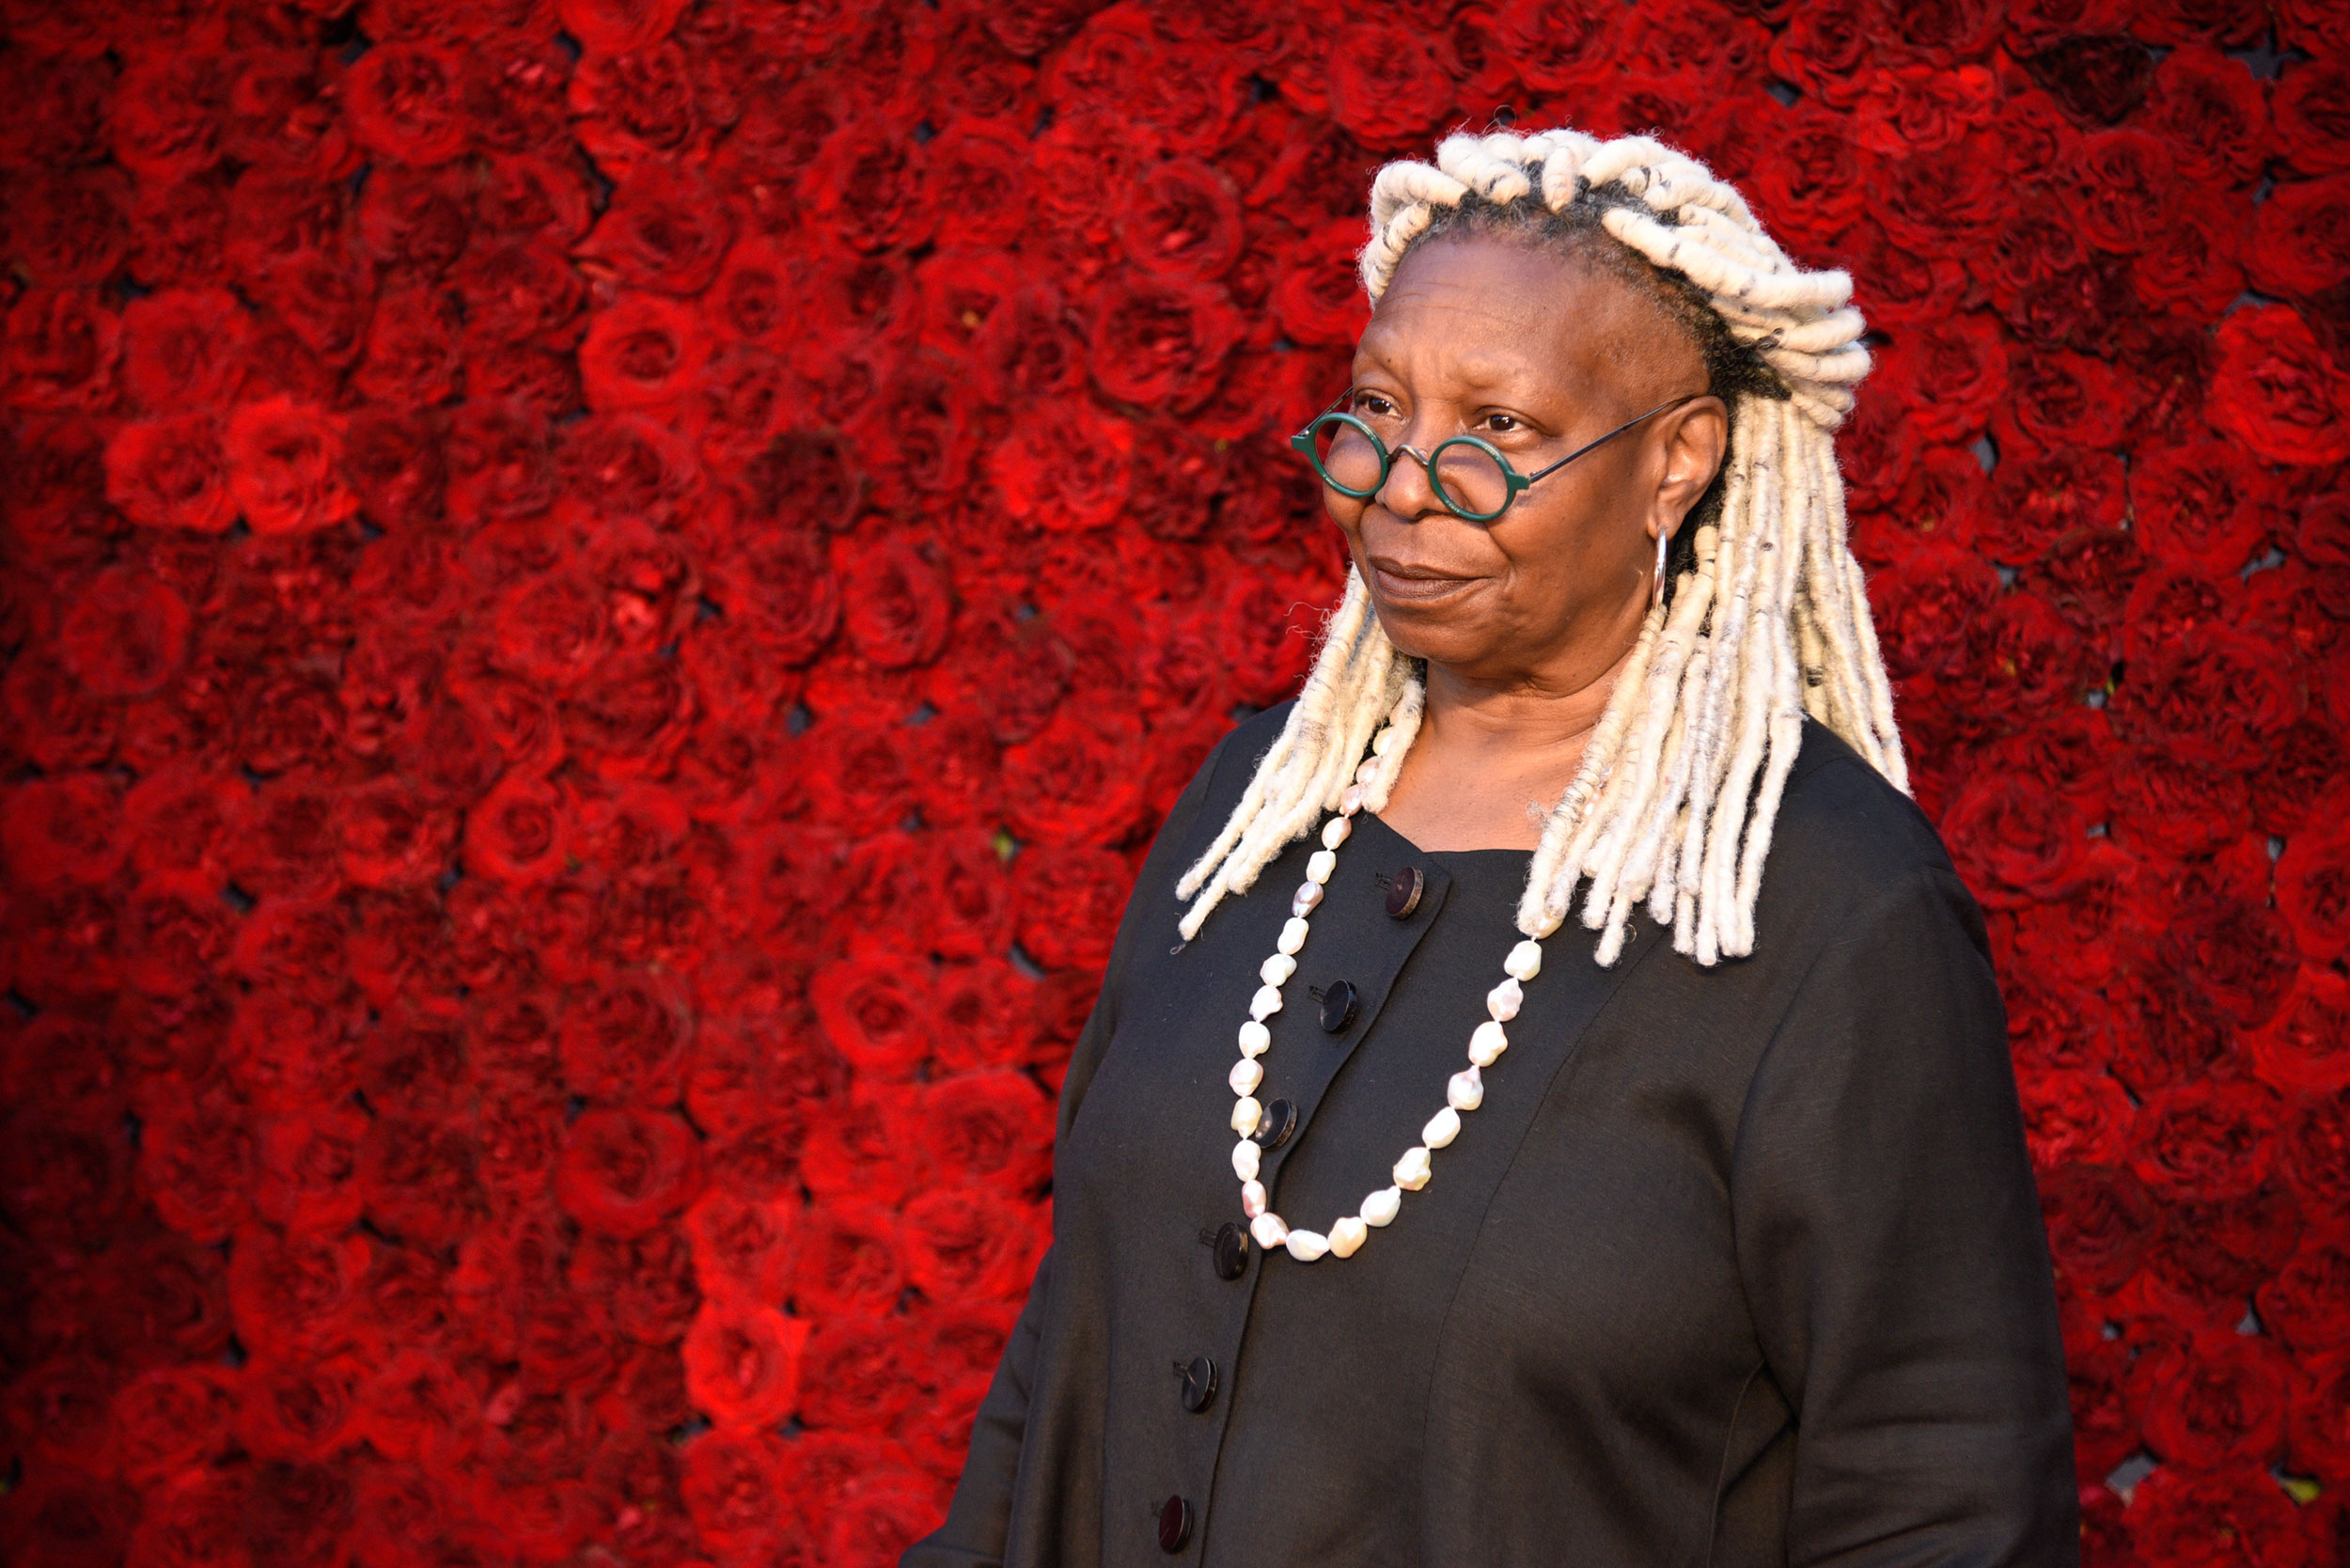 Whoopi Goldberg apologizes for her statements on ‘The View’ about the organization Turning Point USA